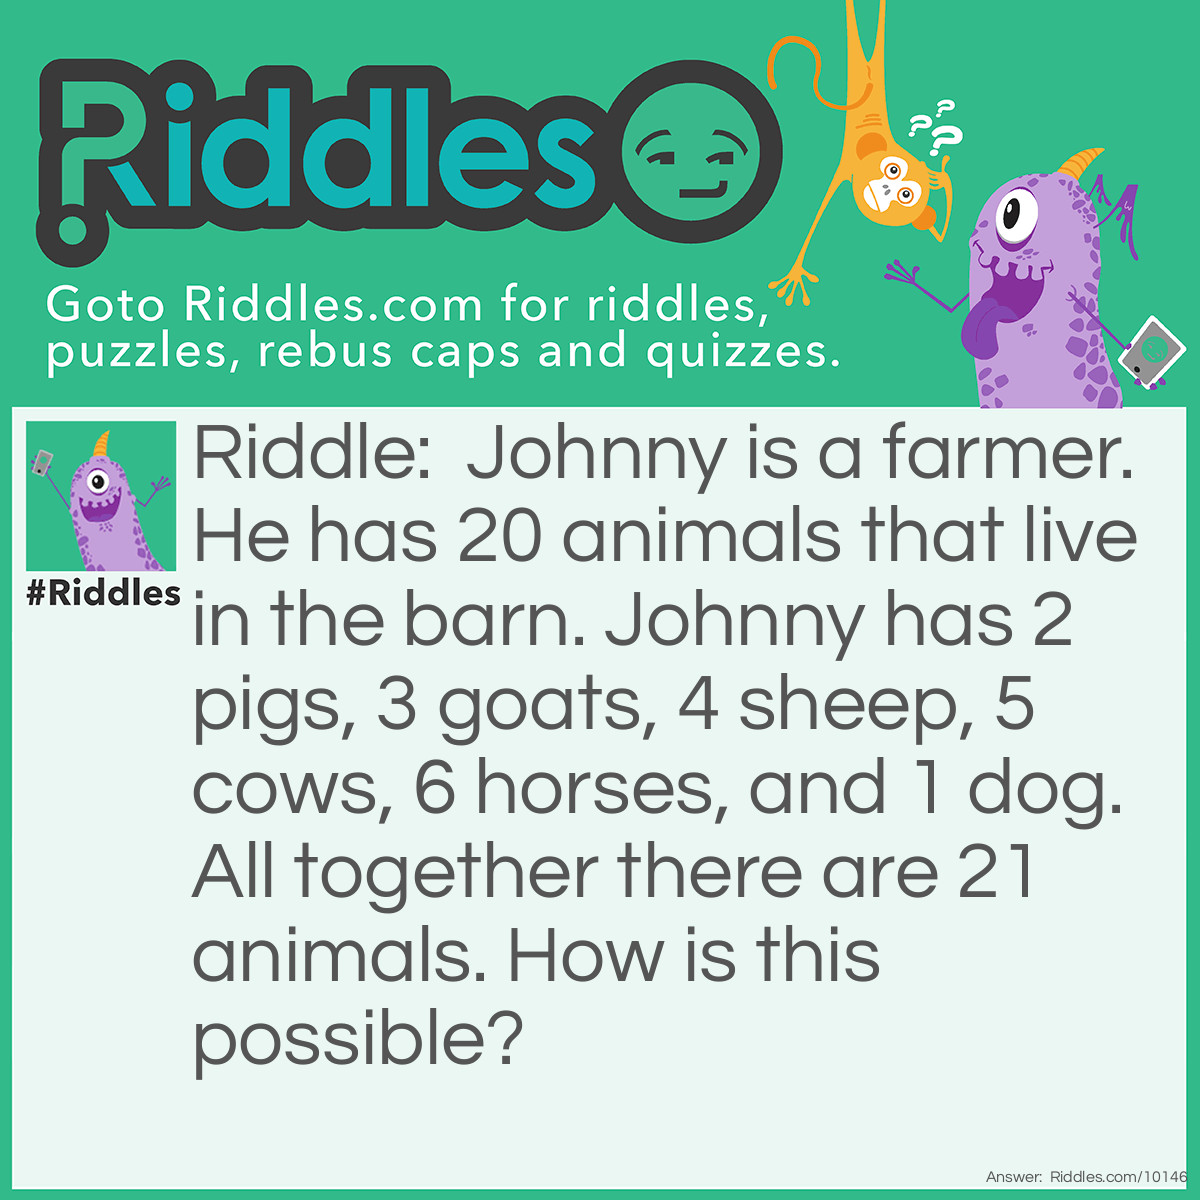 Riddle: Johnny is a farmer. He has 20 animals that live in the barn. Johnny has 2 pigs, 3 goats, 4 sheep, 5 cows, 6 horses, and 1 dog. All together there are 21 animals. How is this possible? Answer: Johnny has 20 animals that live in the barn. The dog doesn't live in the barn. It lives in the house with Johnny.